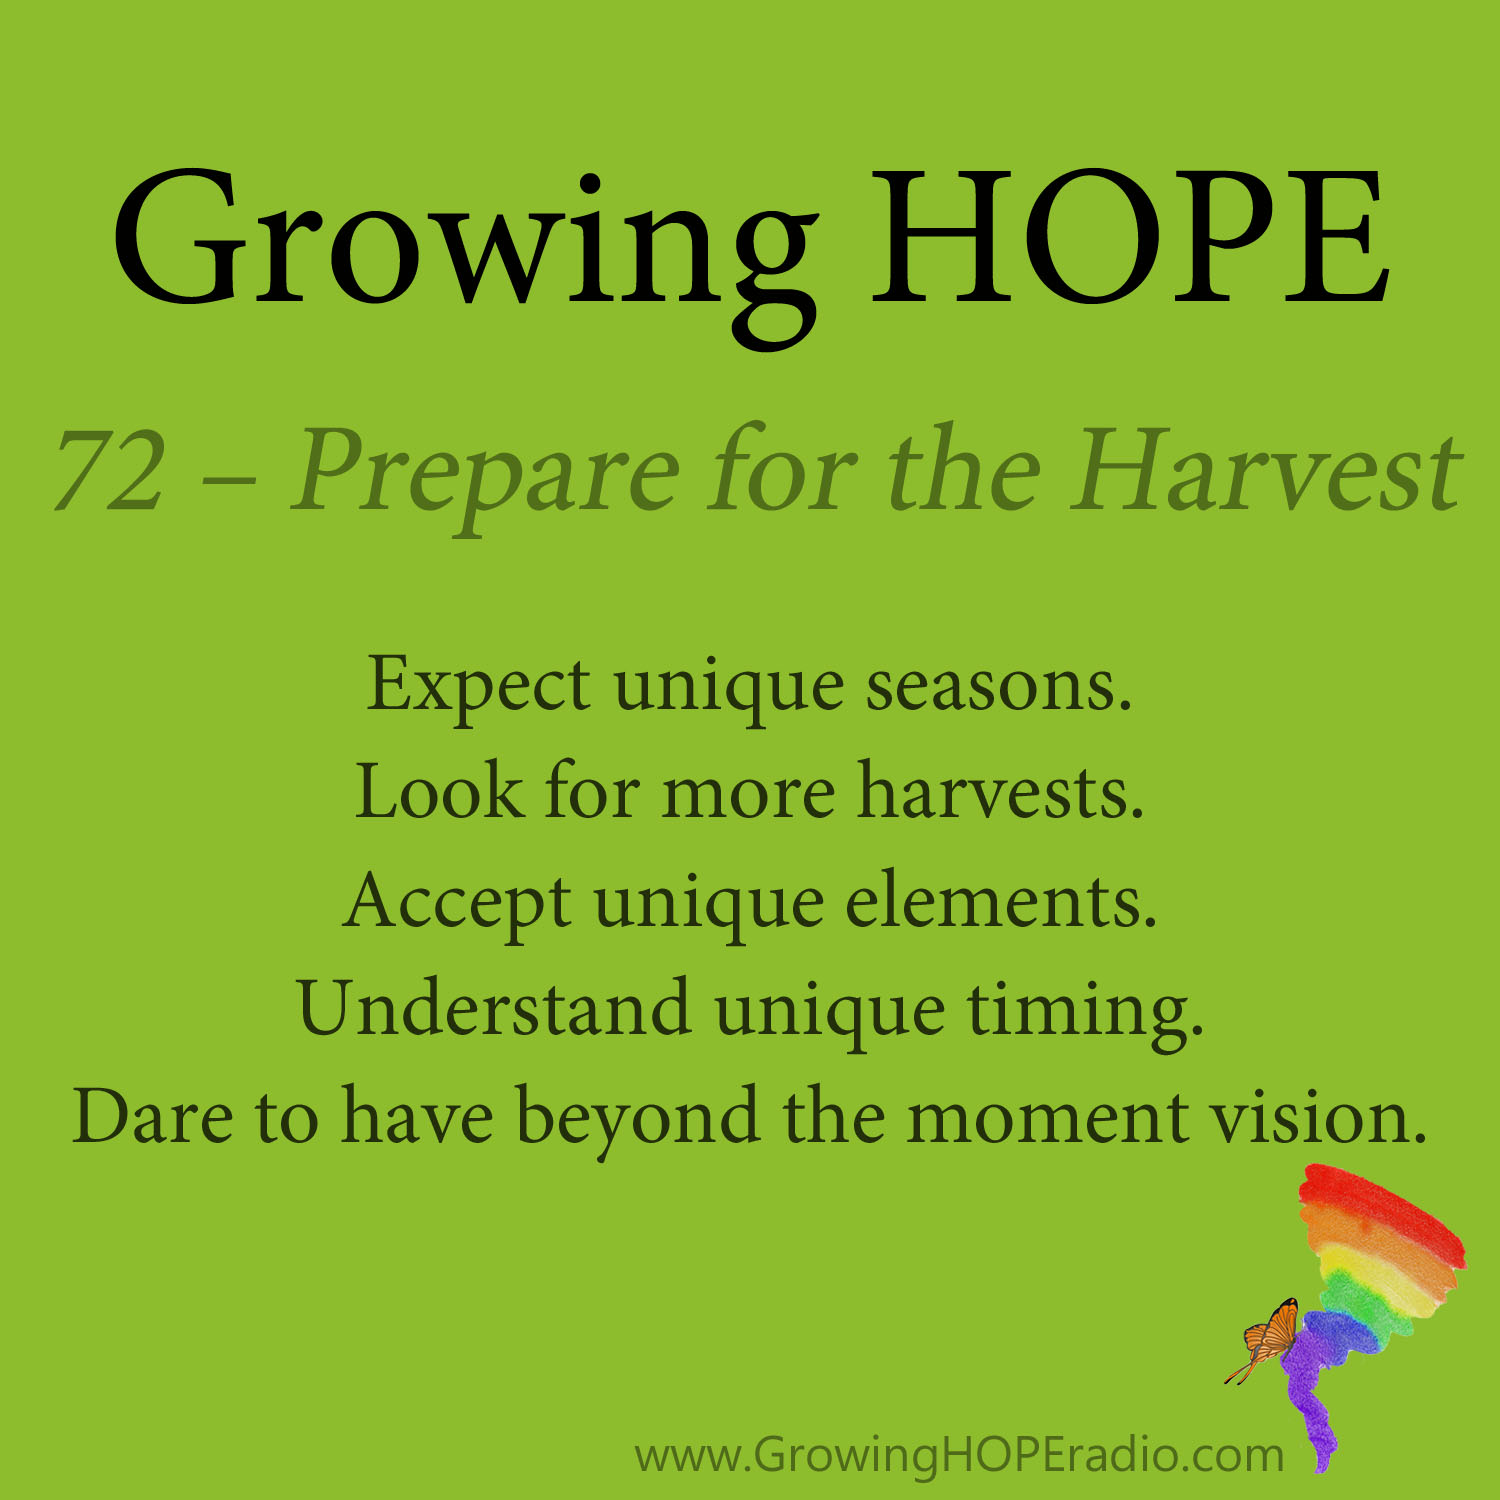 Growing HOPE Daily - 5 Points - 72 – Prepared for the Harvest